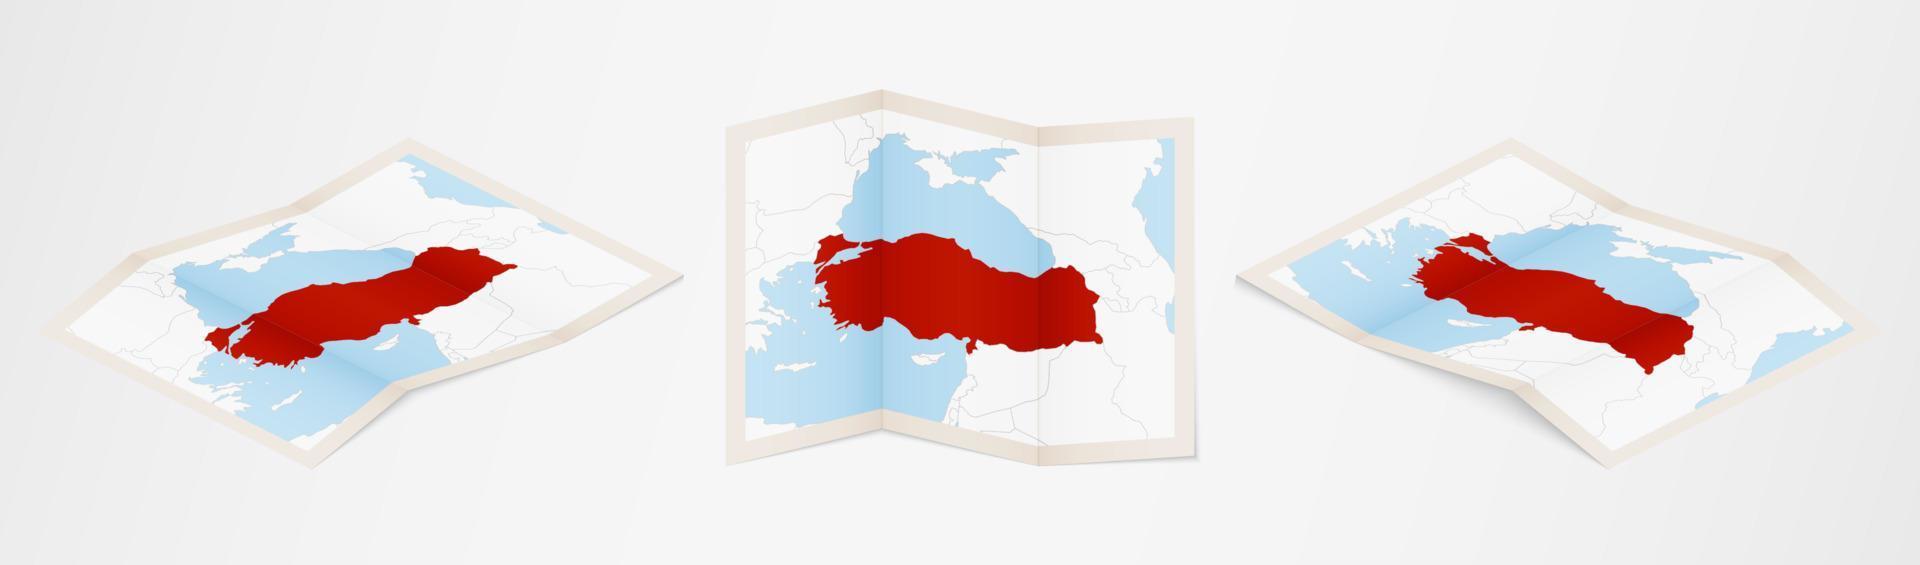 Folded map of Turkey in three different versions. vector